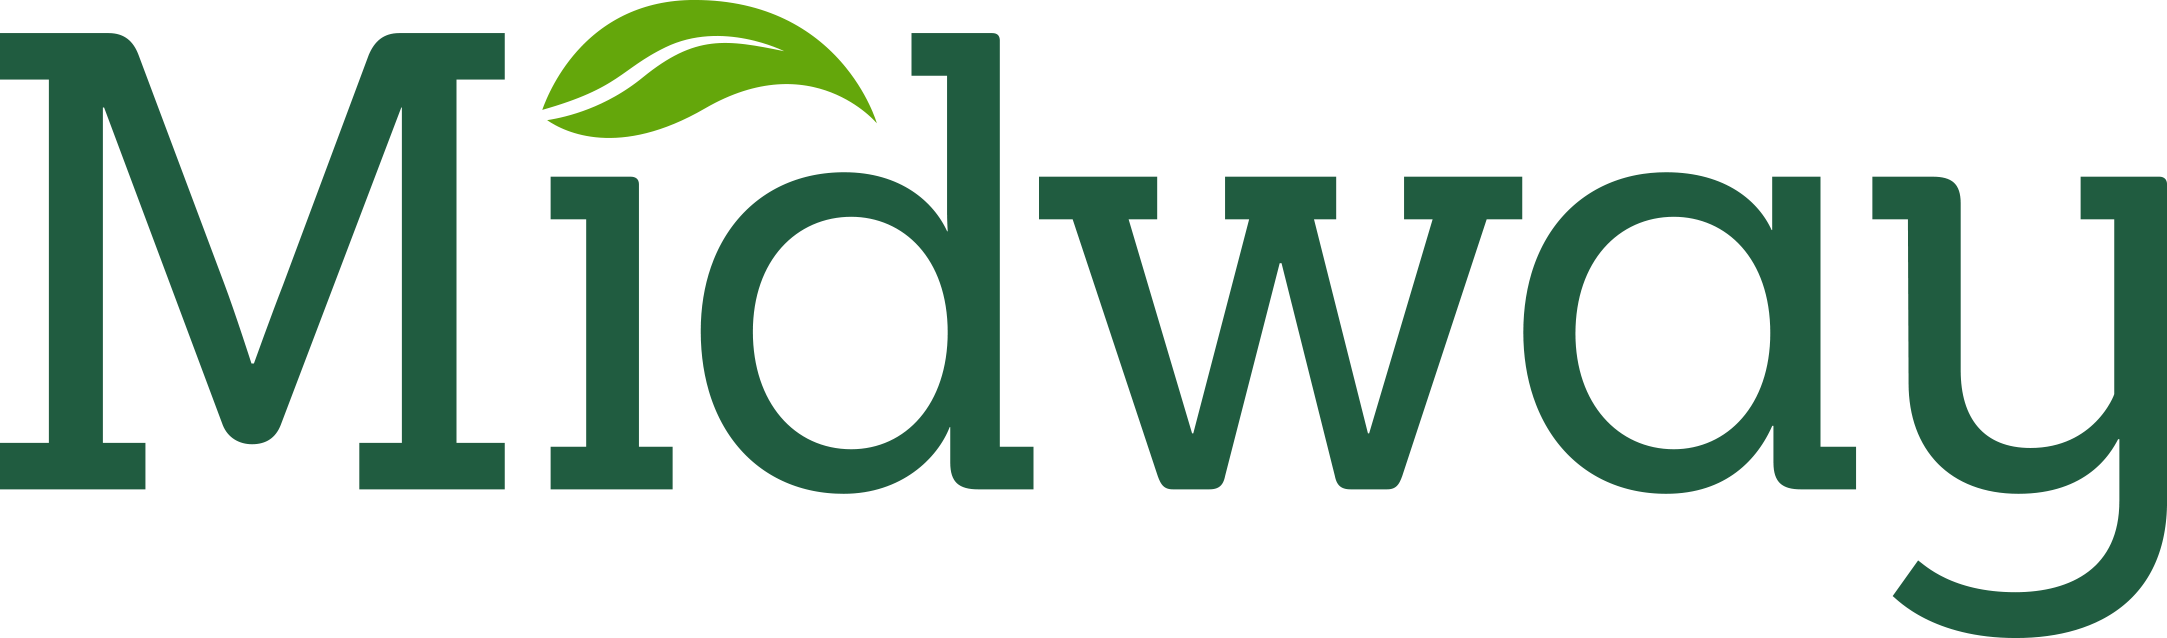 Midway Limited Logo